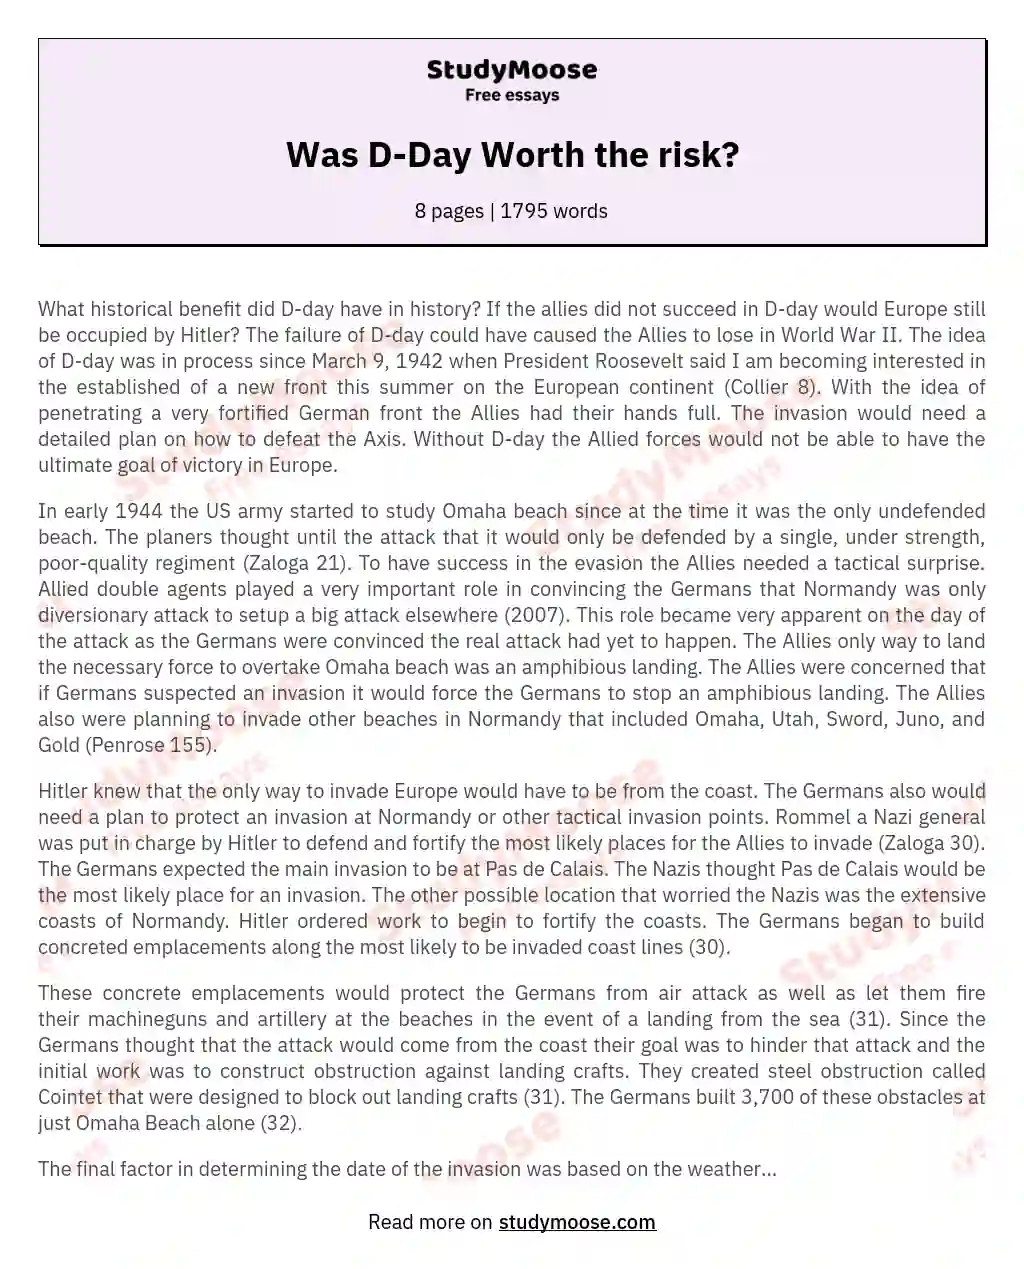 Was D-Day Worth the risk?